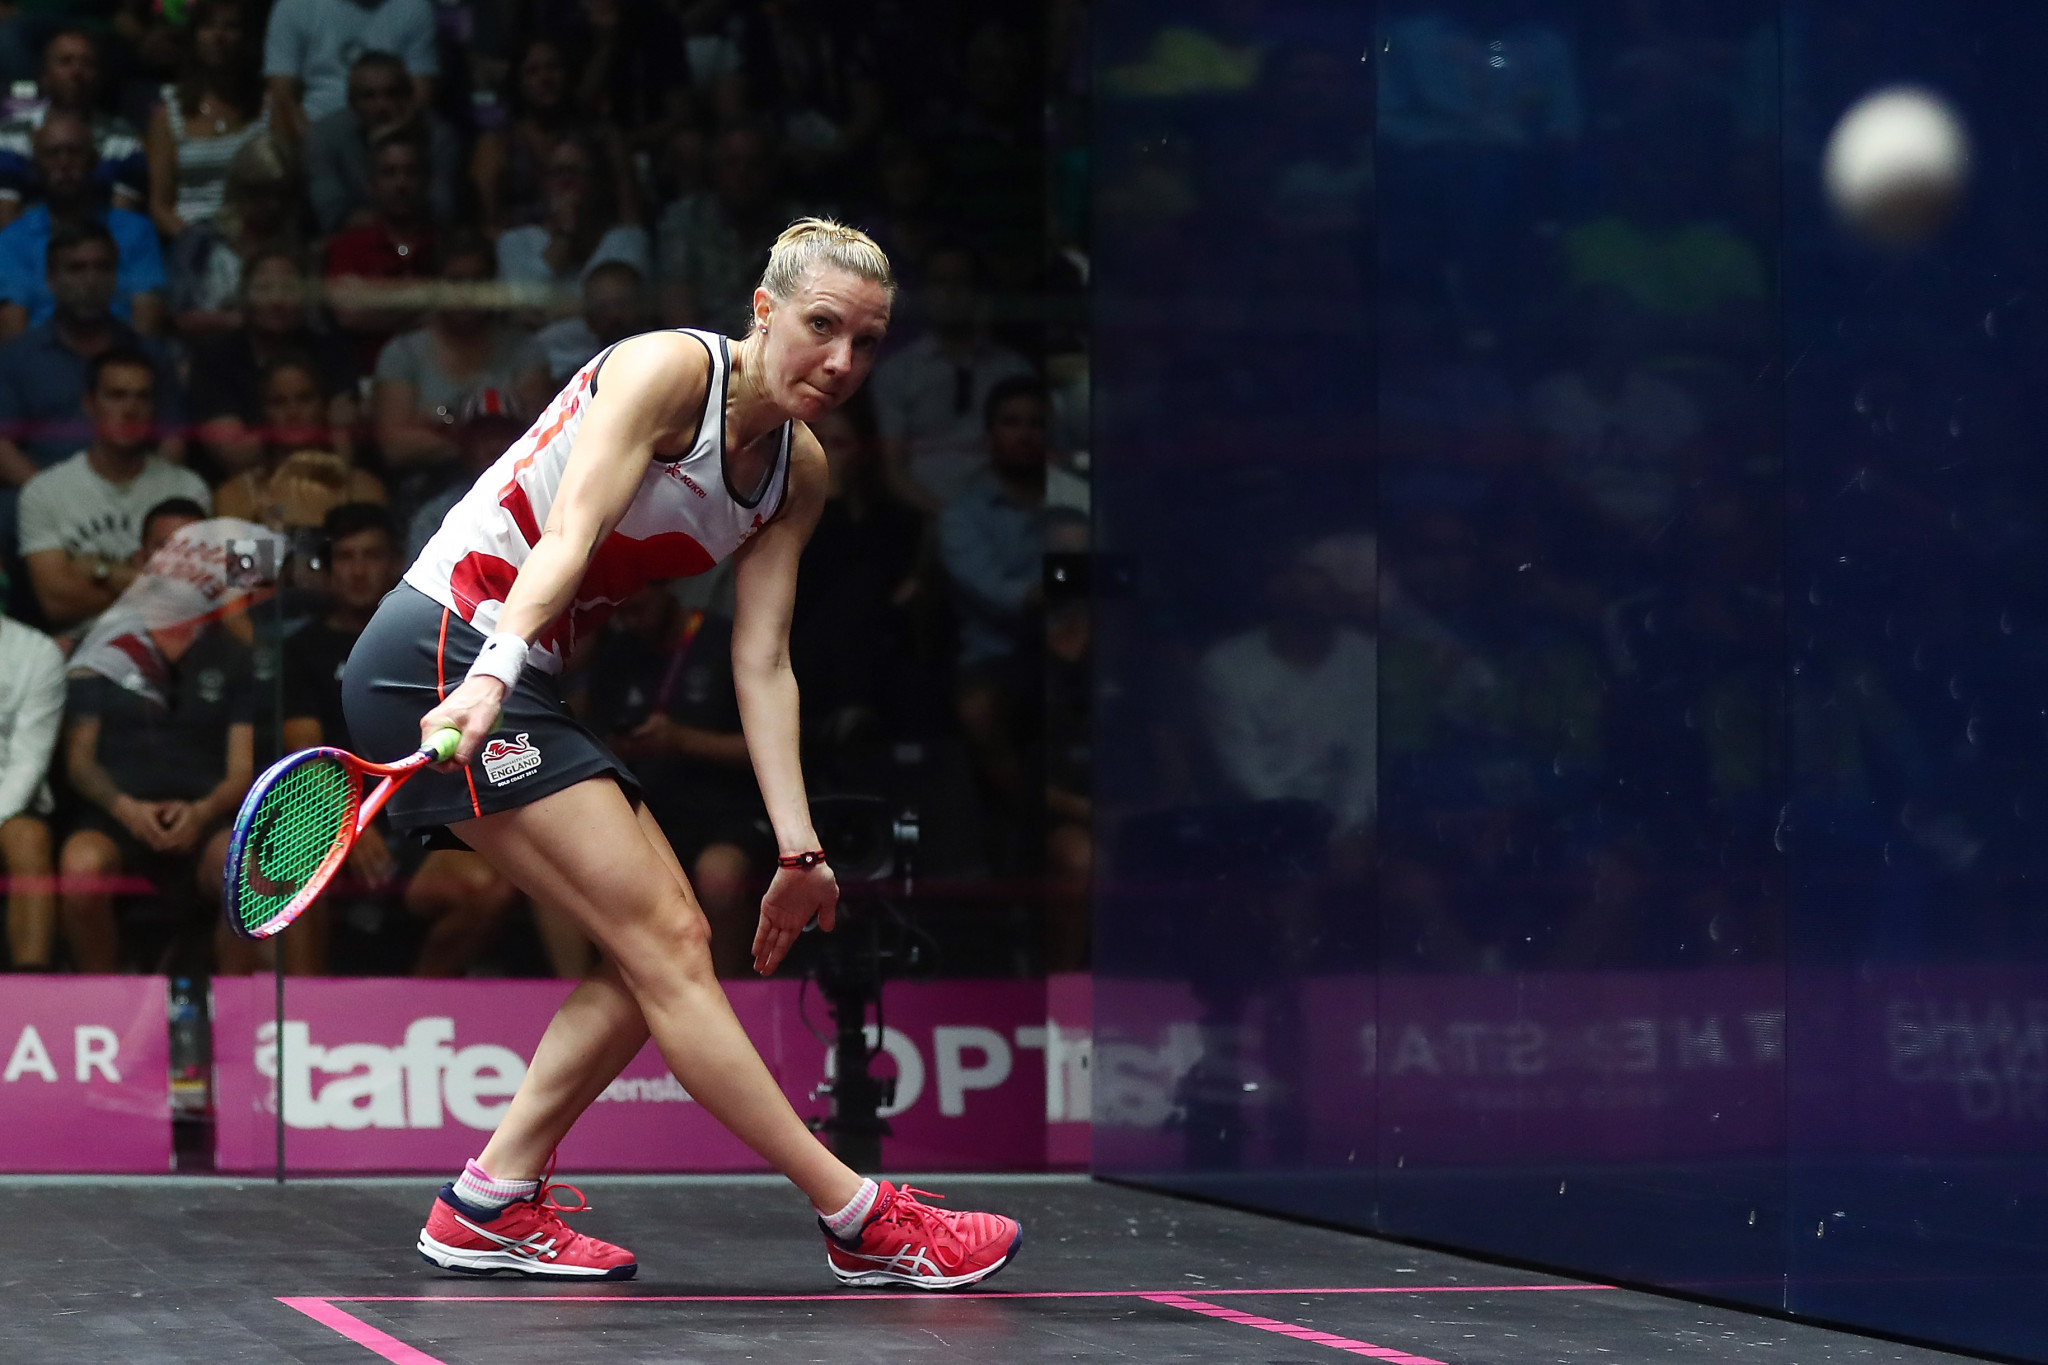 Laura Massaro is hoping to win her third straight title in Dubai ©Getty Images